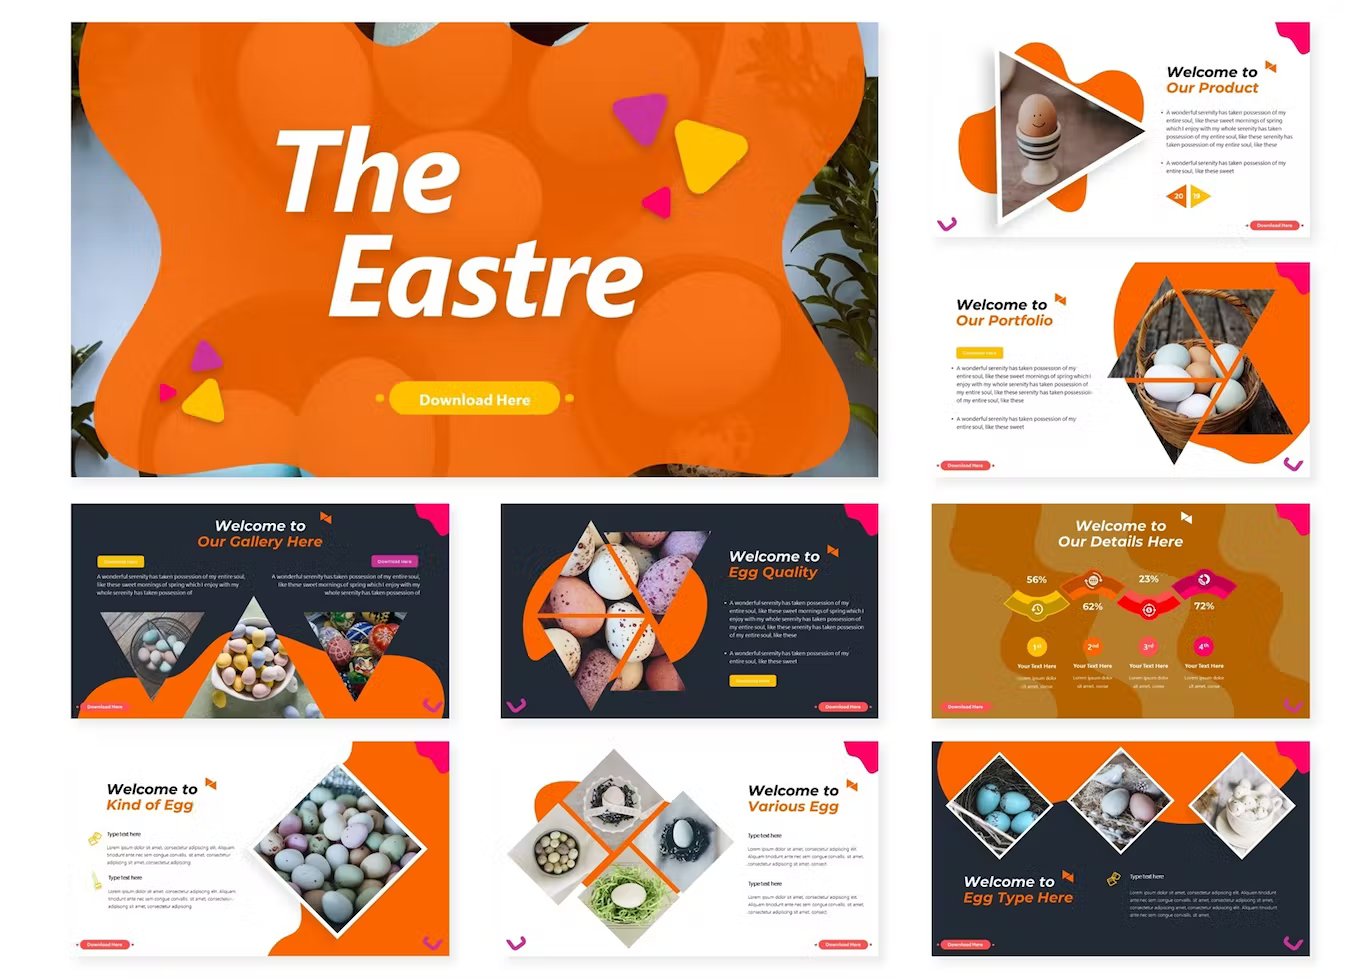 A set of 9 different the easter keynote templates in orange, white, dark gray, yellow and pink on a white background.